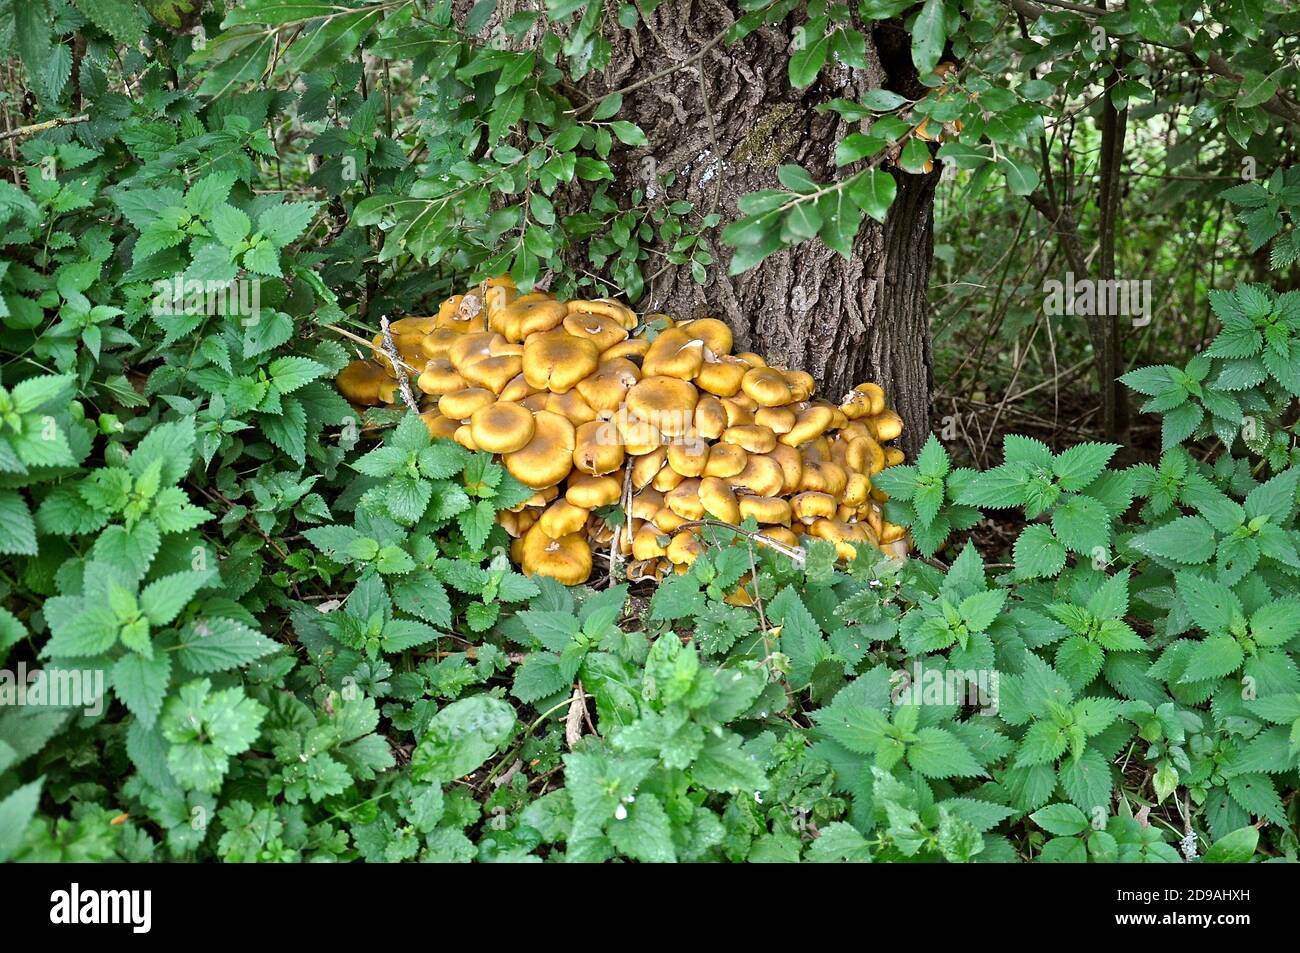 Woodland fauna of yellow mushrooms growing at the base of a tree, surrounded by green nettles. Stock Photo